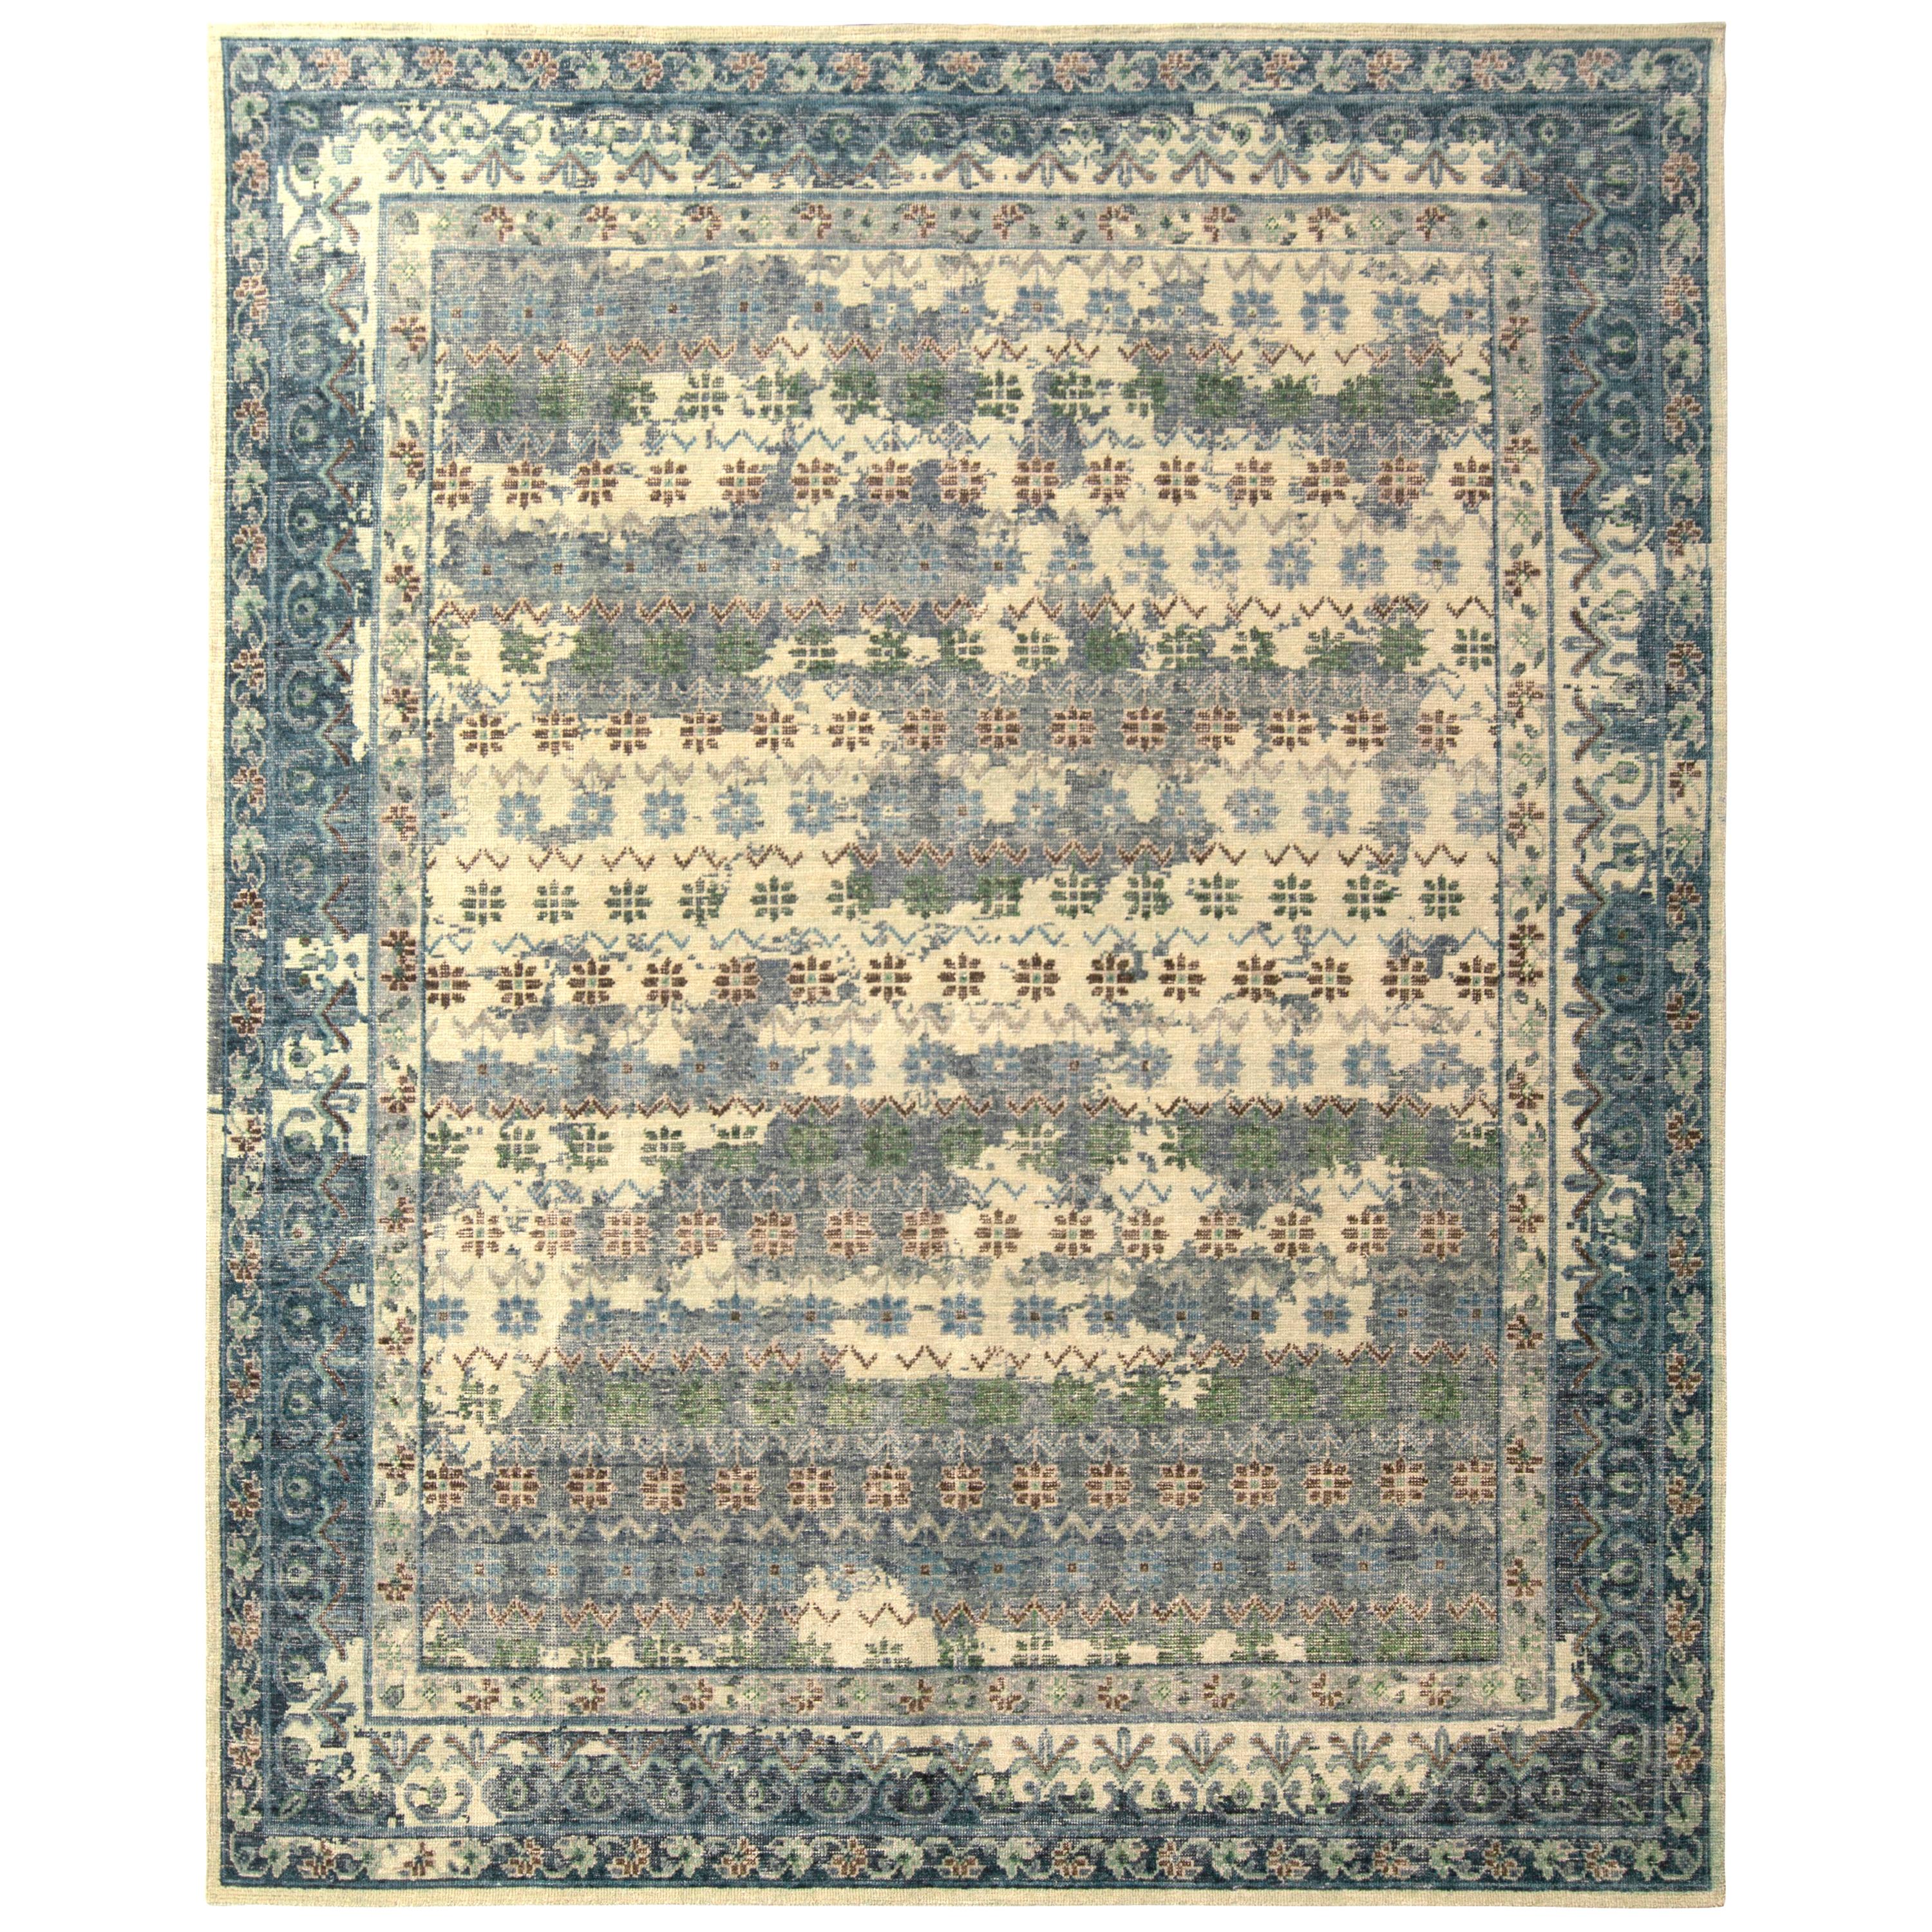 This hand knotted Classic rug joins the latest additions to the Homage Collection by Rug & Kilim, an ambitious custom-capable encyclopedia of periods recapturing and reinventing an unprecedented range of international styles including Oriental